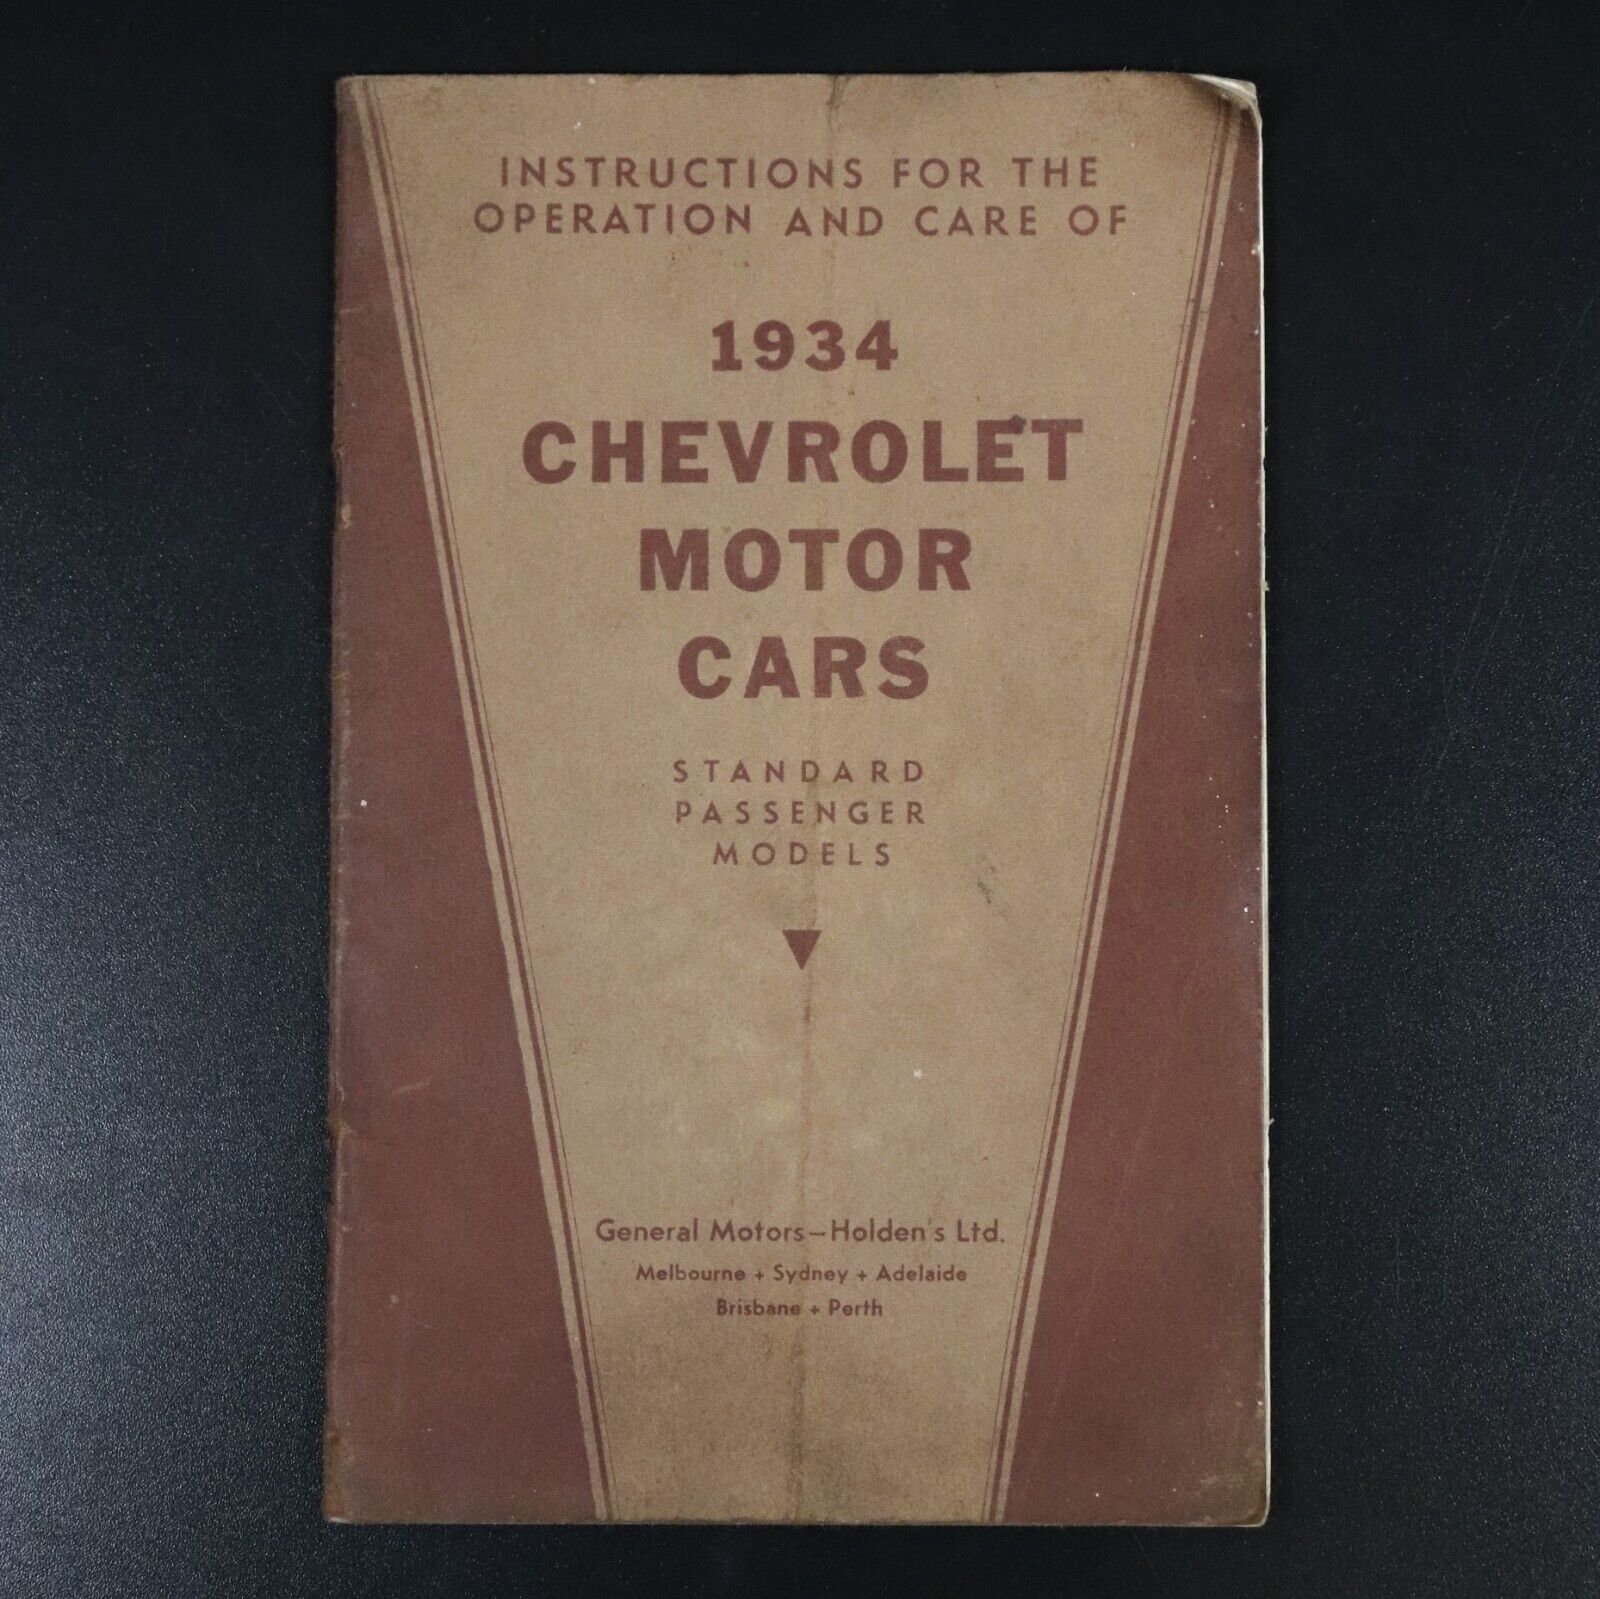 1934 Chevrolet Motor Cars Owners Manual Automotive Book G.M. Holden's Australia